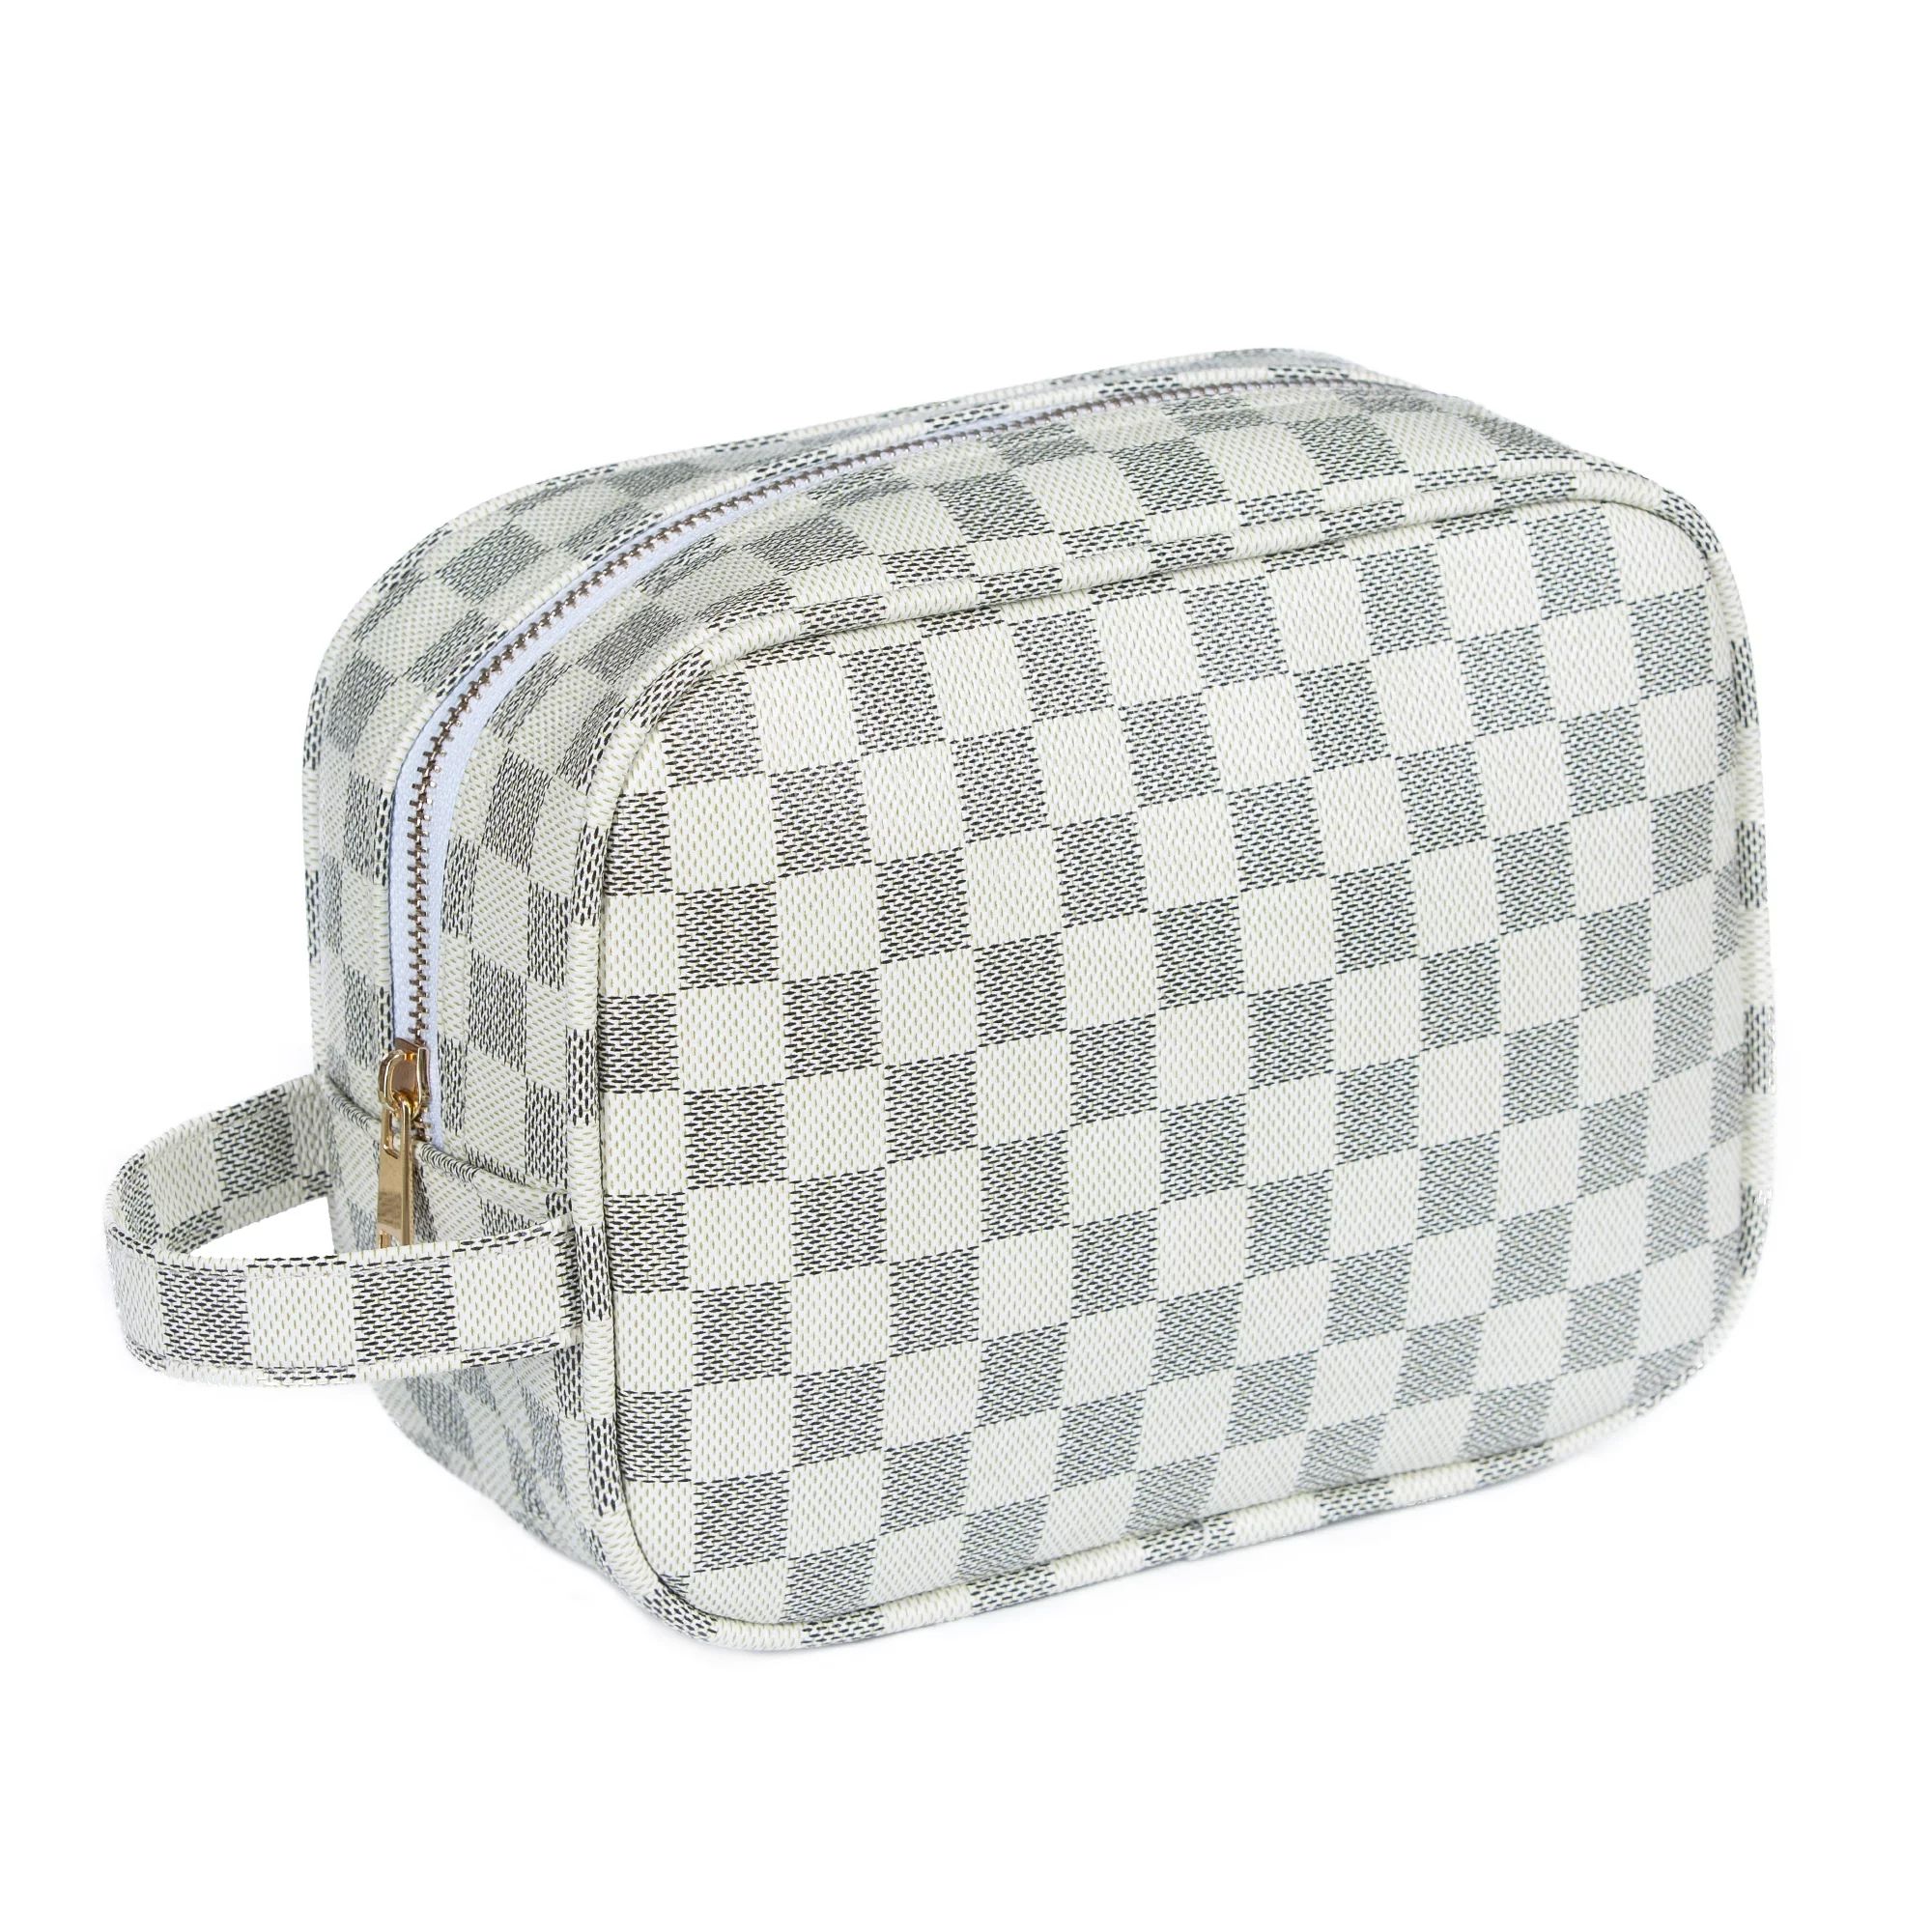 Luxouria Checkered Make Up Bag PU Leather Luxury Cosmetic Toiletry Travel bag Unisex | Walmart (US)